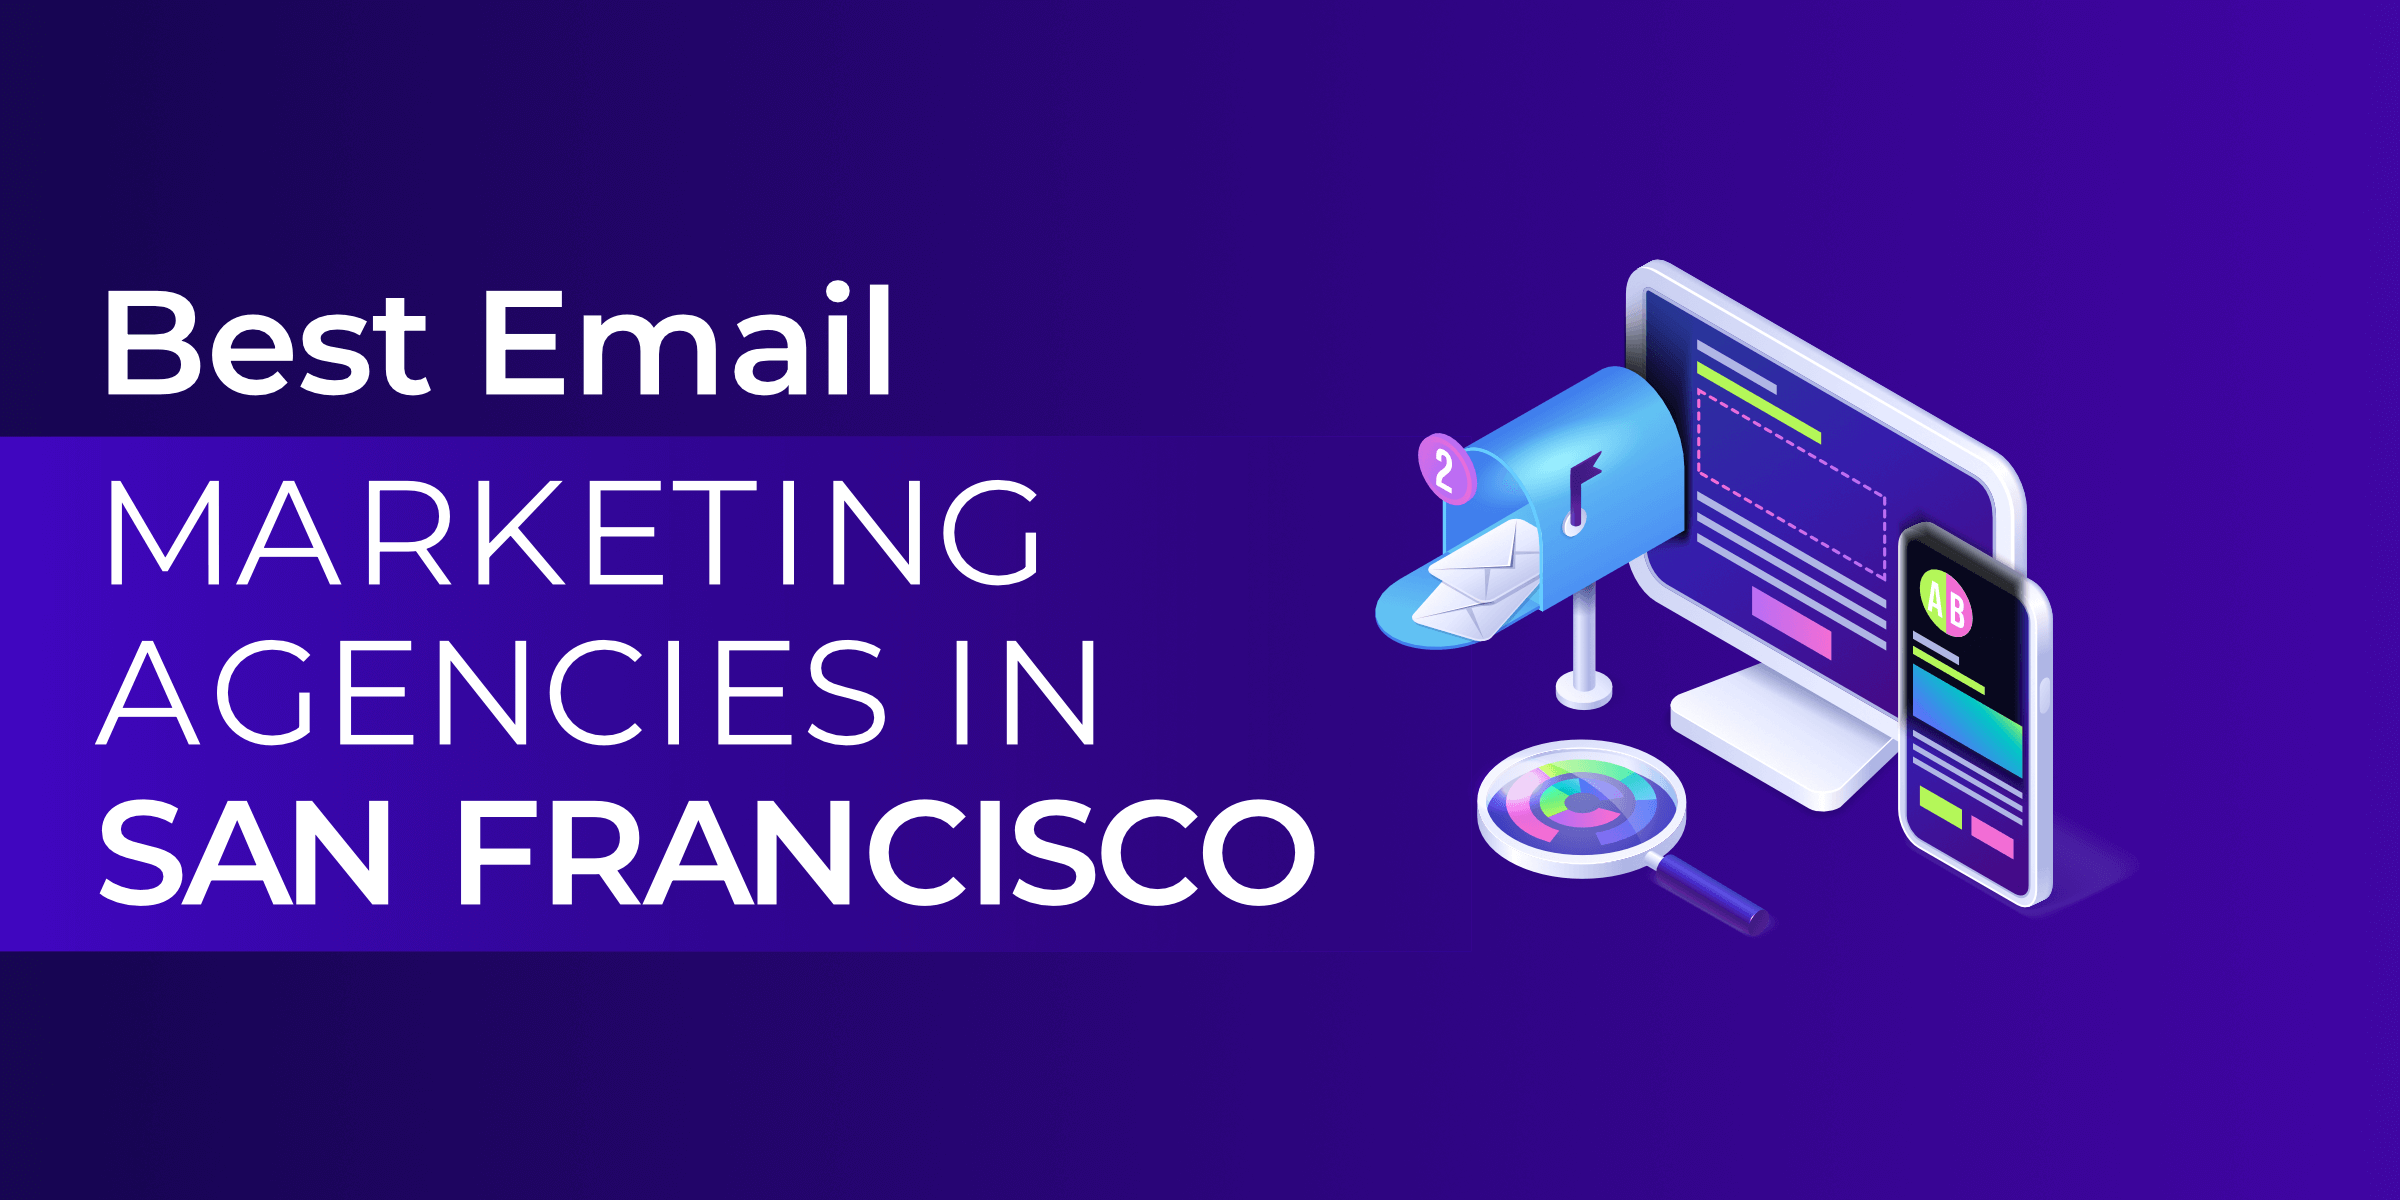 Best Email Marketing Agencies in San Francisco